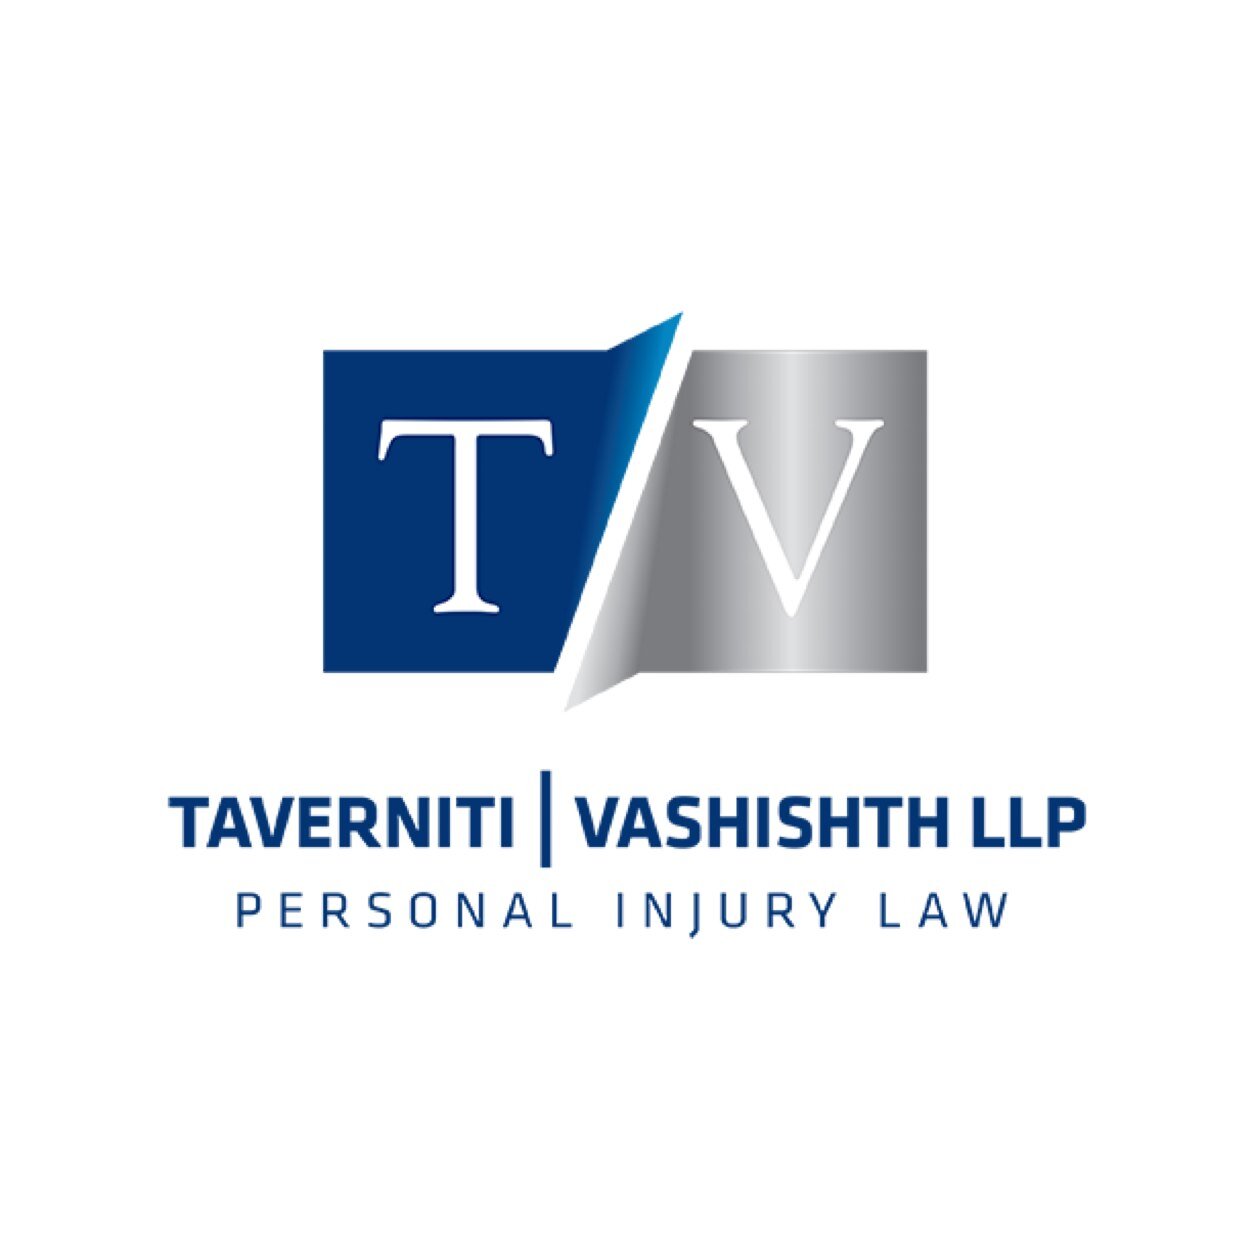 Toronto Personal Injury Lawyers Taverniti Vashishth LLP | Protecting your rights getting what is fair when your safety has been compromised | 1.800.LAW.7032